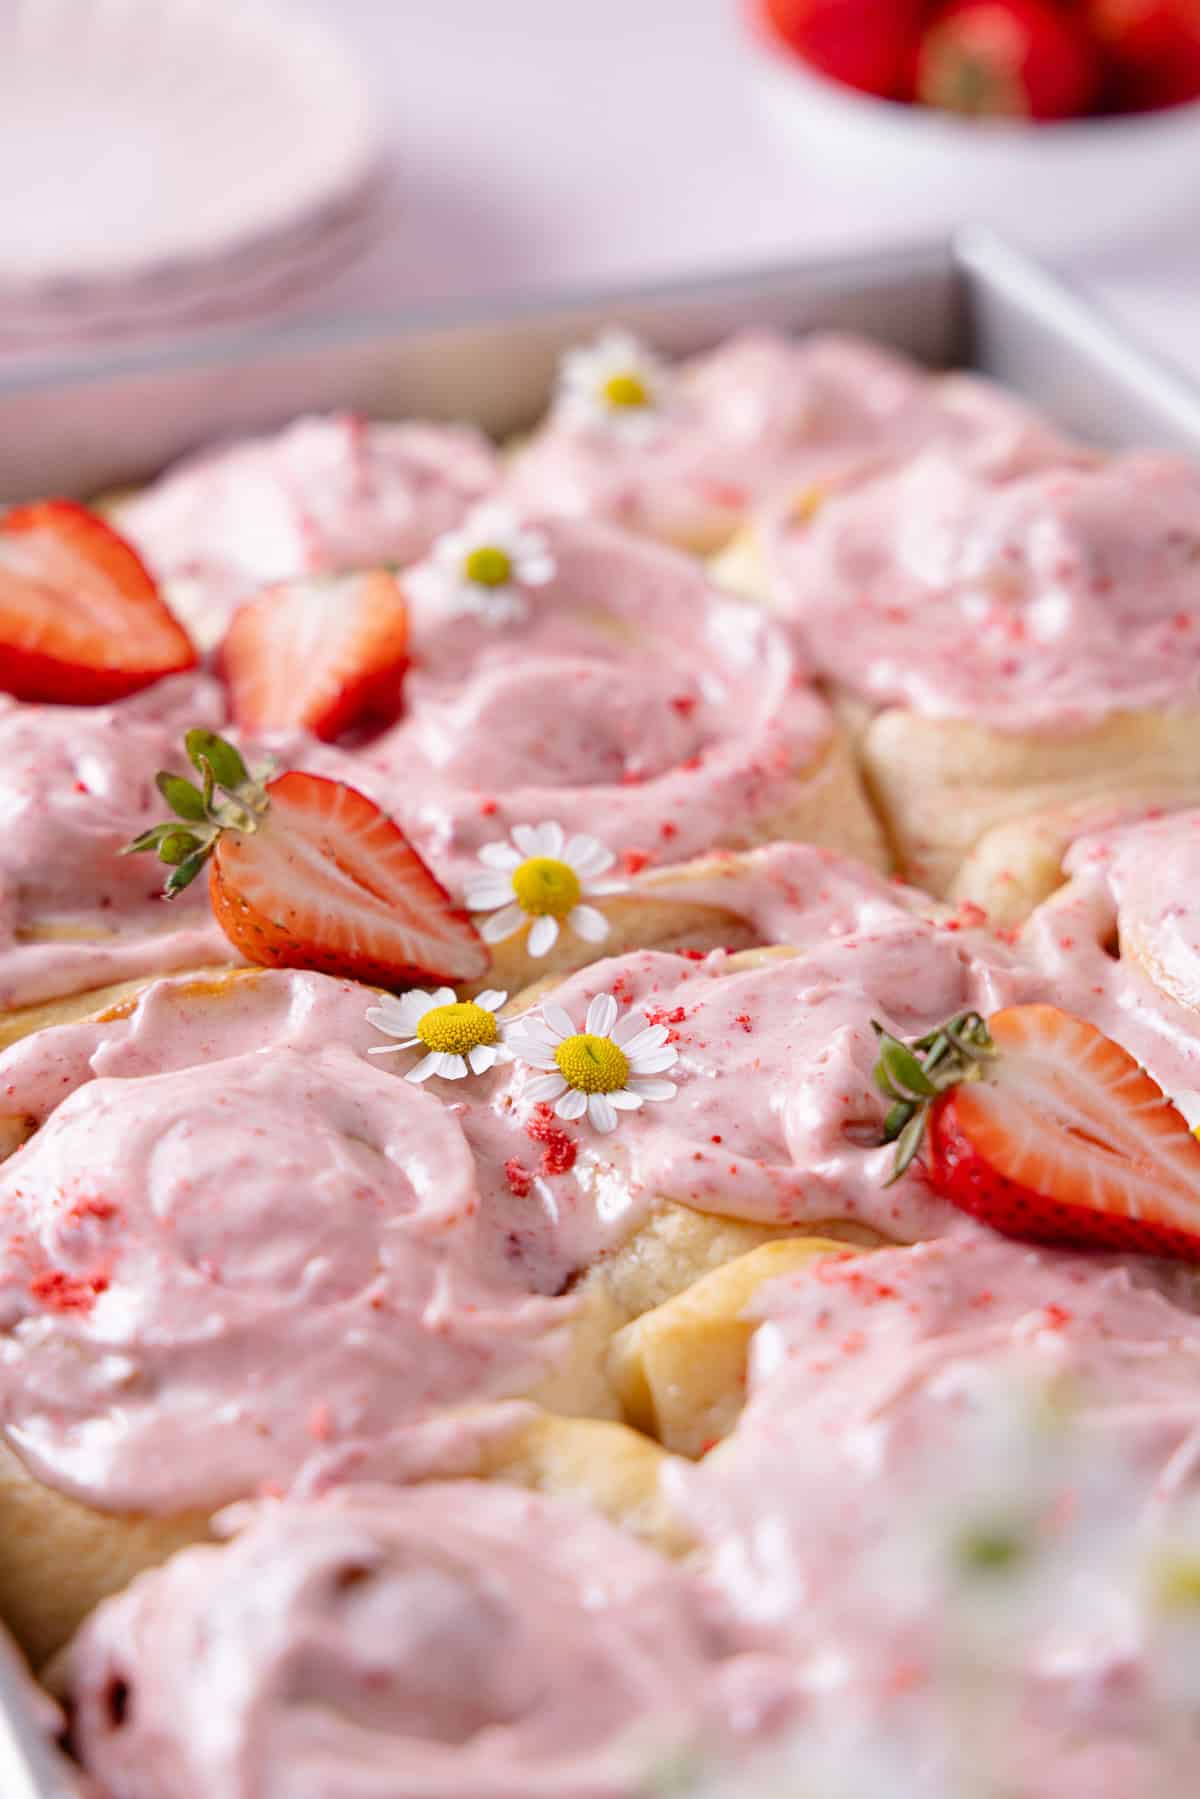 Frosted Strawberry Cinnamon Rolls in a baking tray garnished with fresh strawberries and flowers.